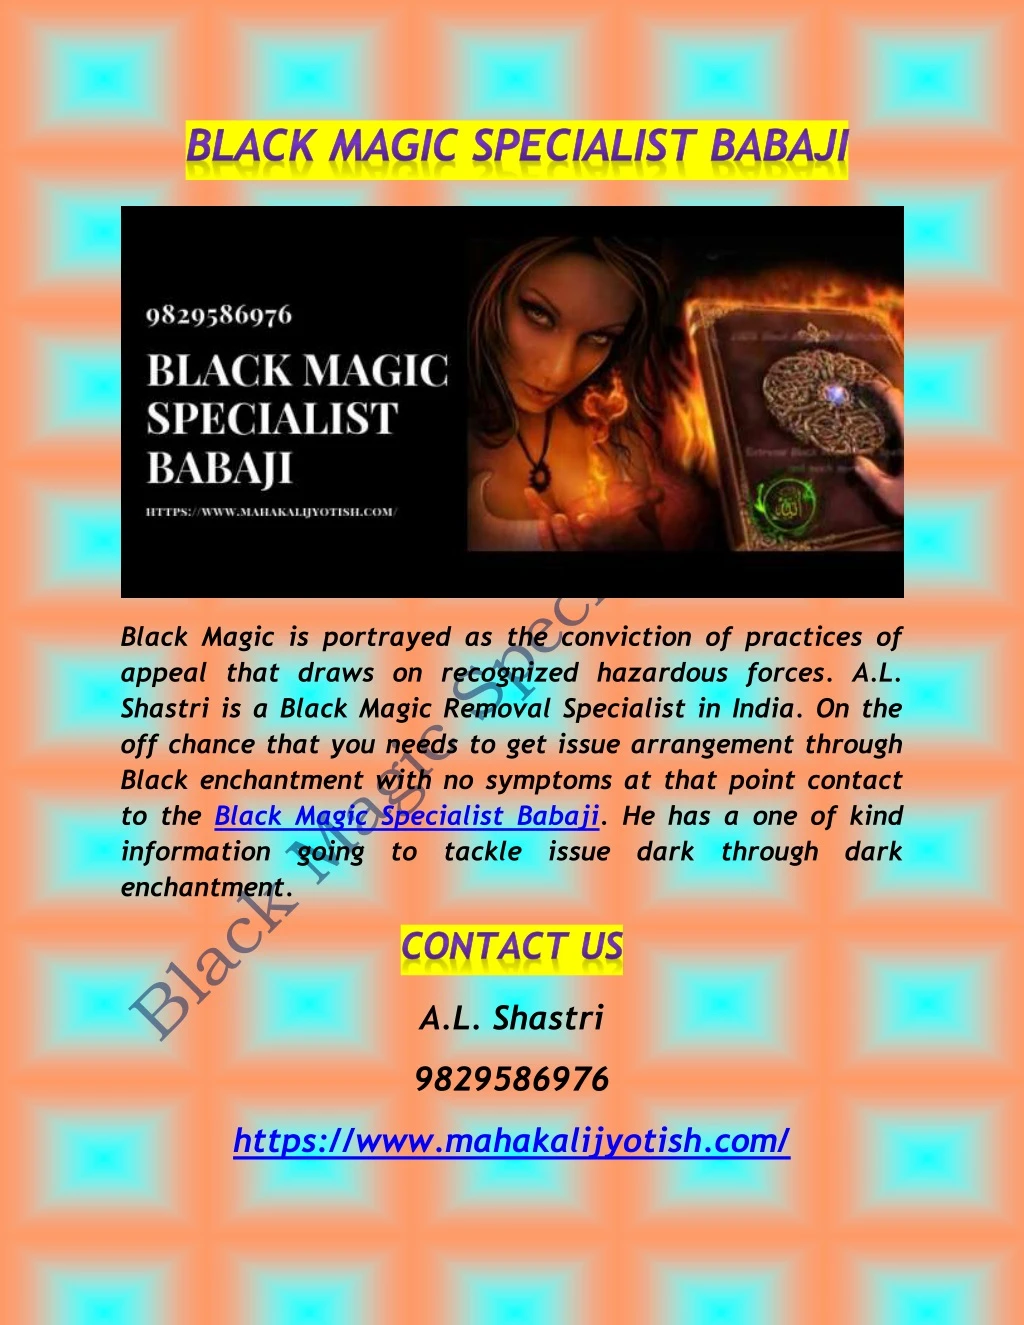 black magic is portrayed as the conviction